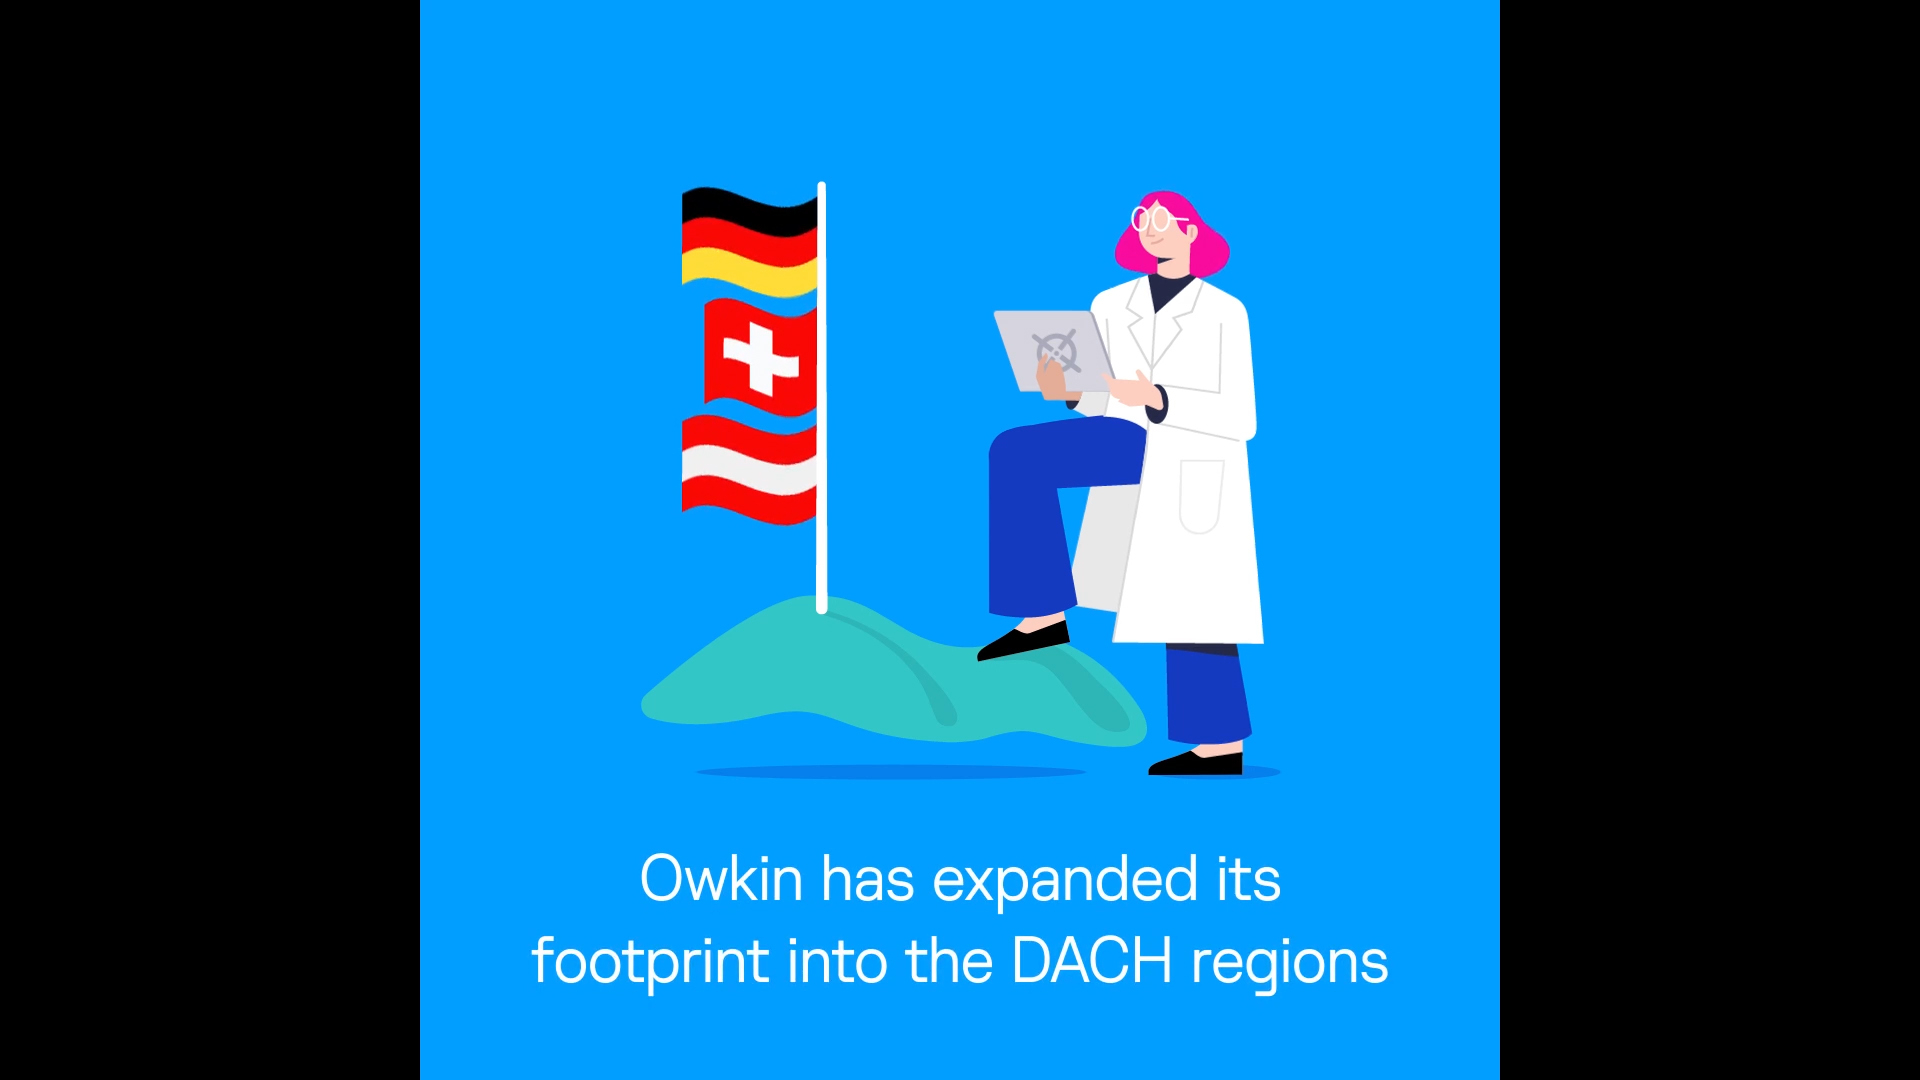 Partnering with nine hospitals in Germany, Austria and Switzerland, Owkin will accelerate research across numerous therapeutic areas to understand unique patient biology better